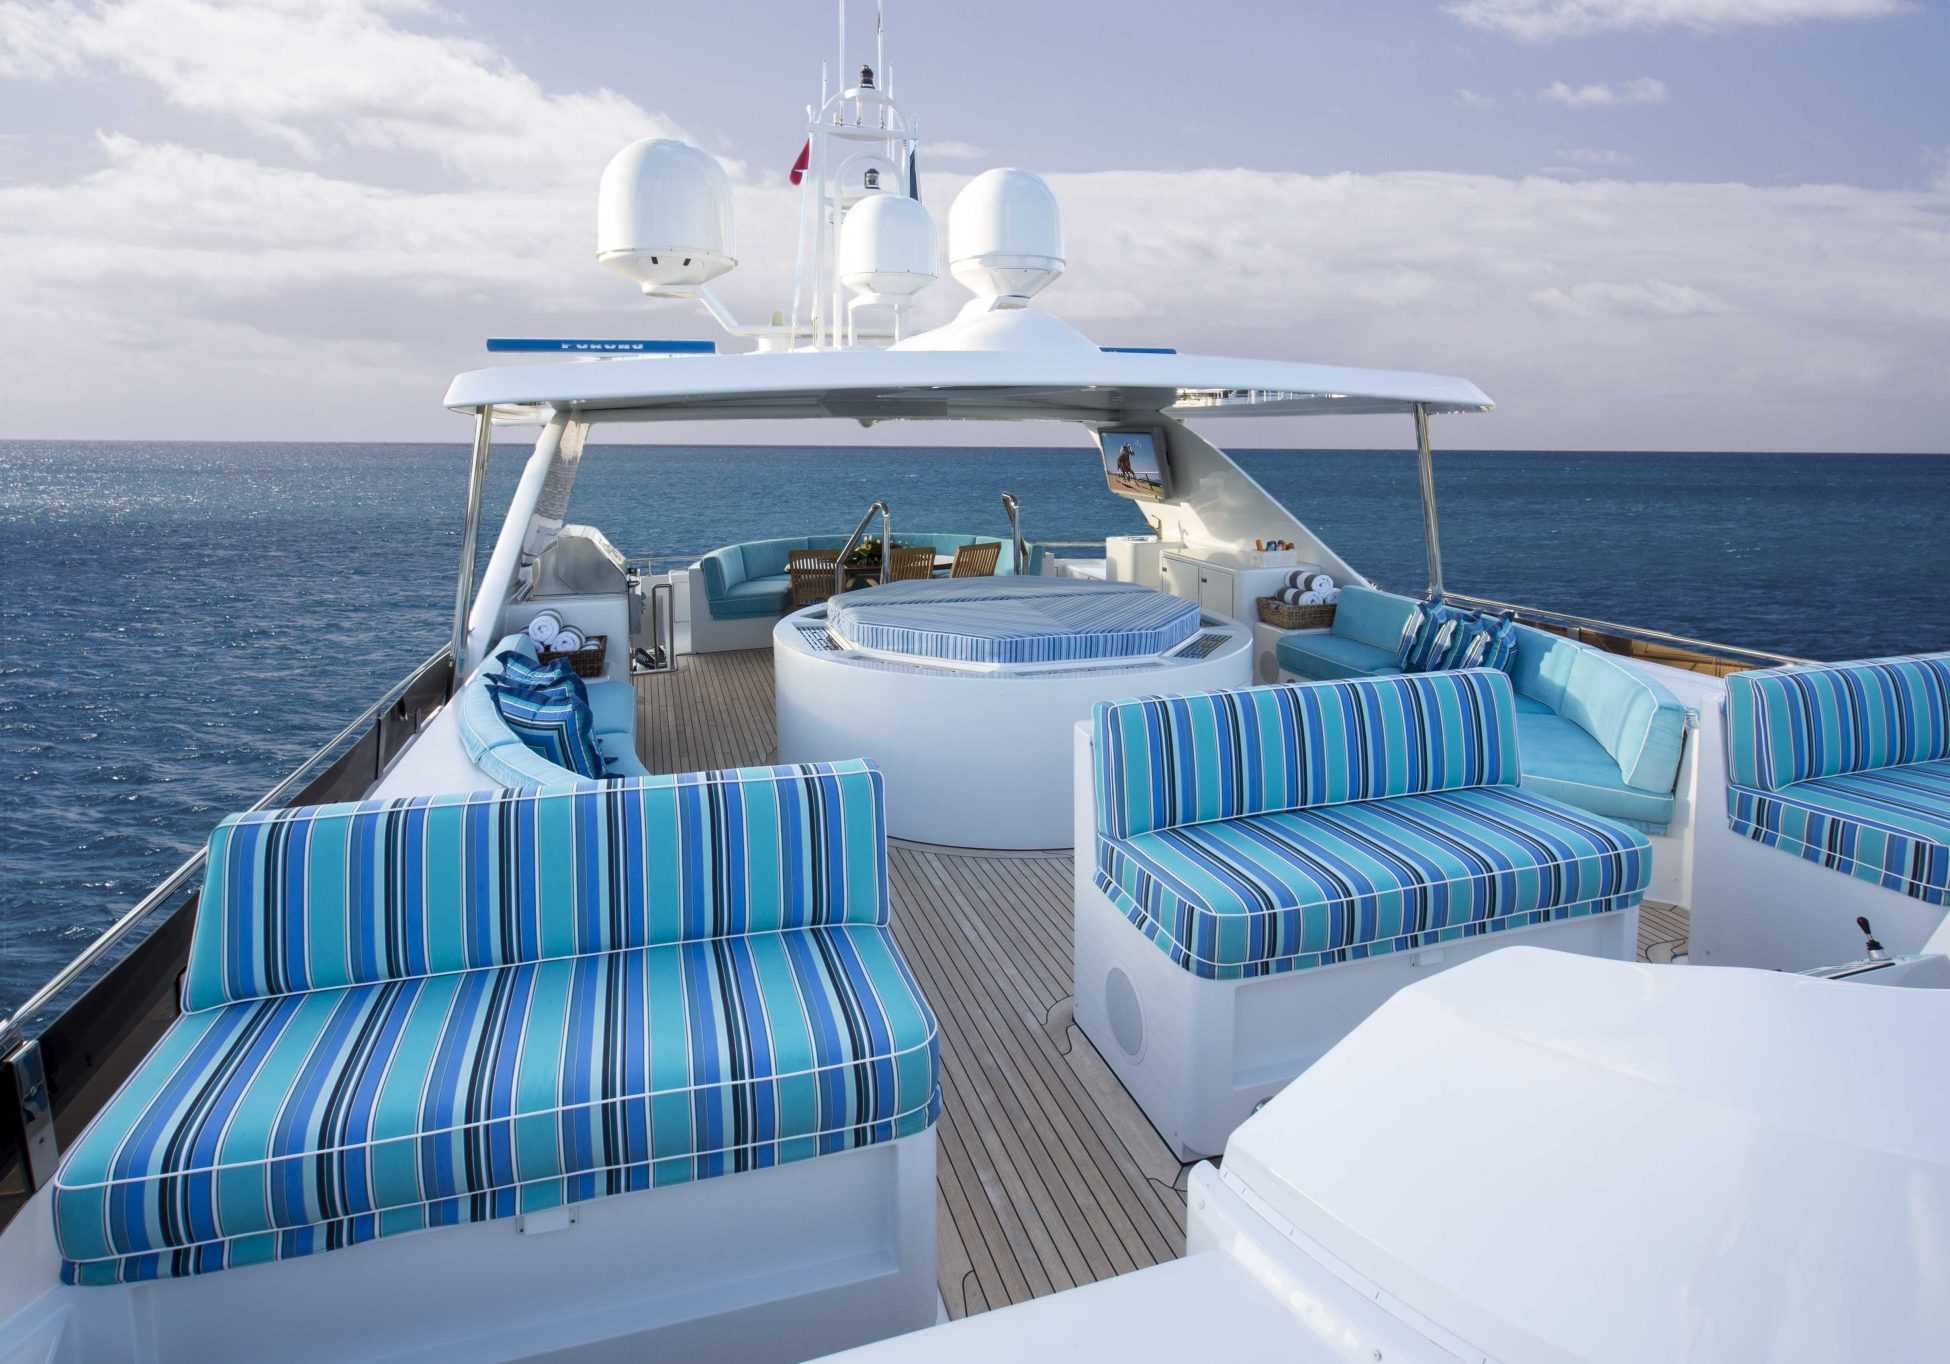 43m Yacht LADY BEE 6631 89 - Karen Lynn Interiors - Interior Design for Yacht, Aircrafts and Residential Projects